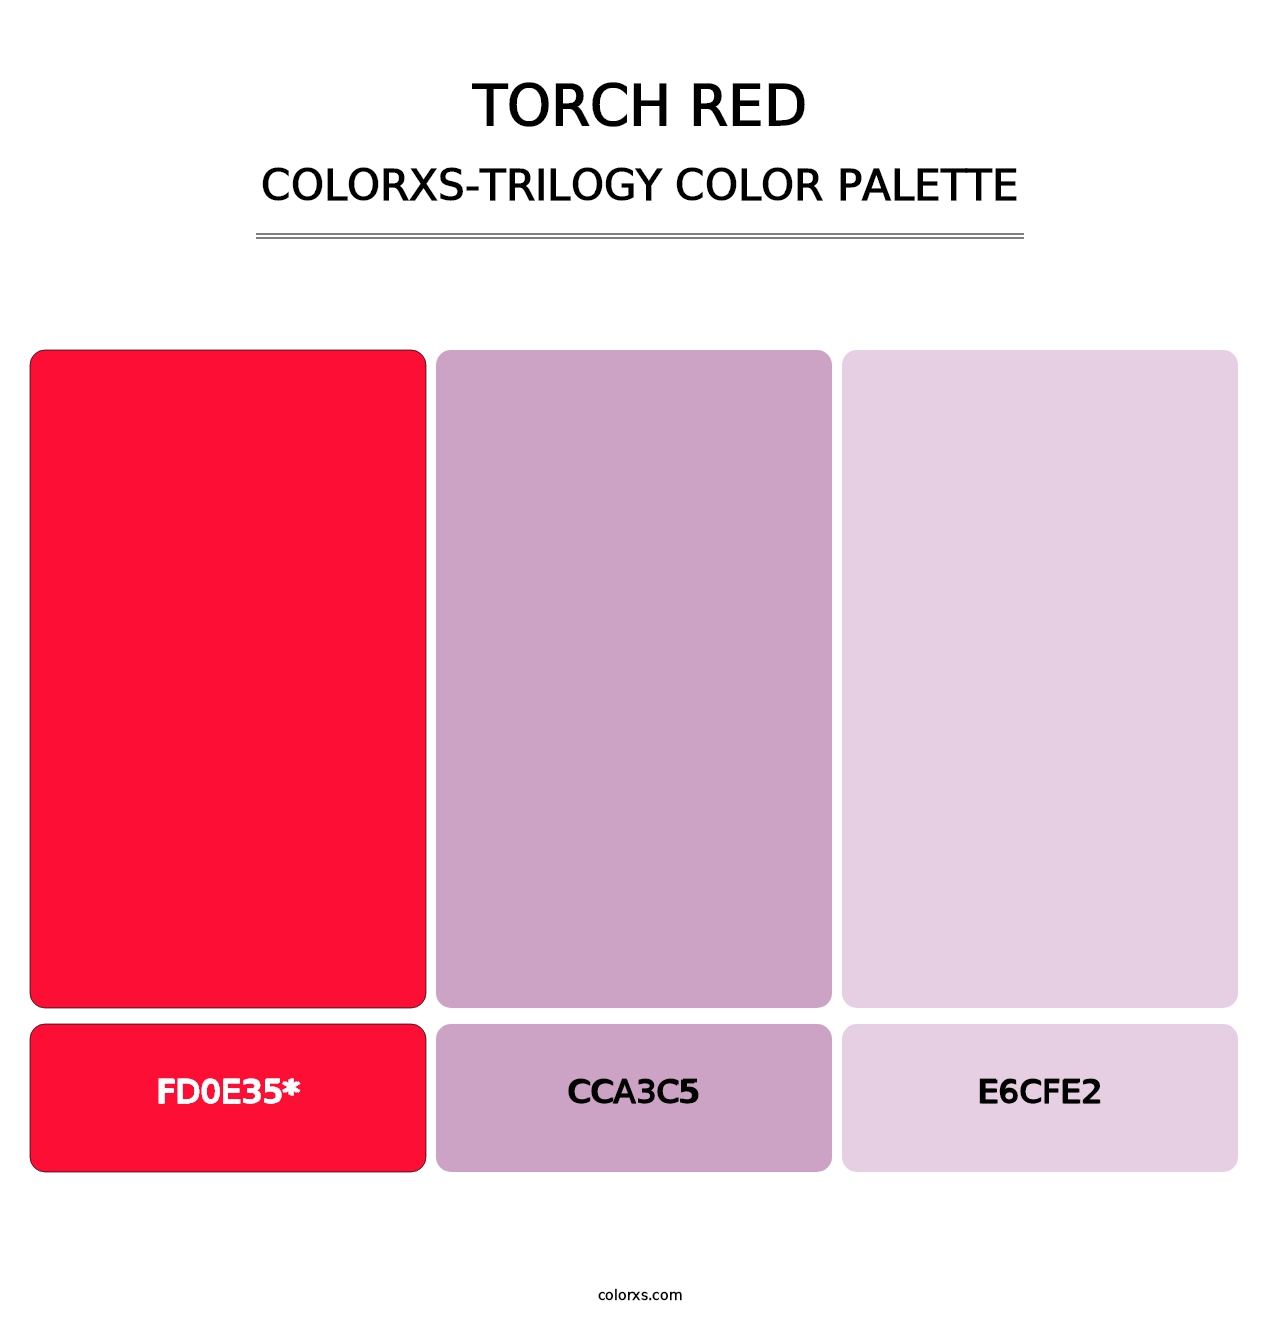 Torch Red - Colorxs Trilogy Palette